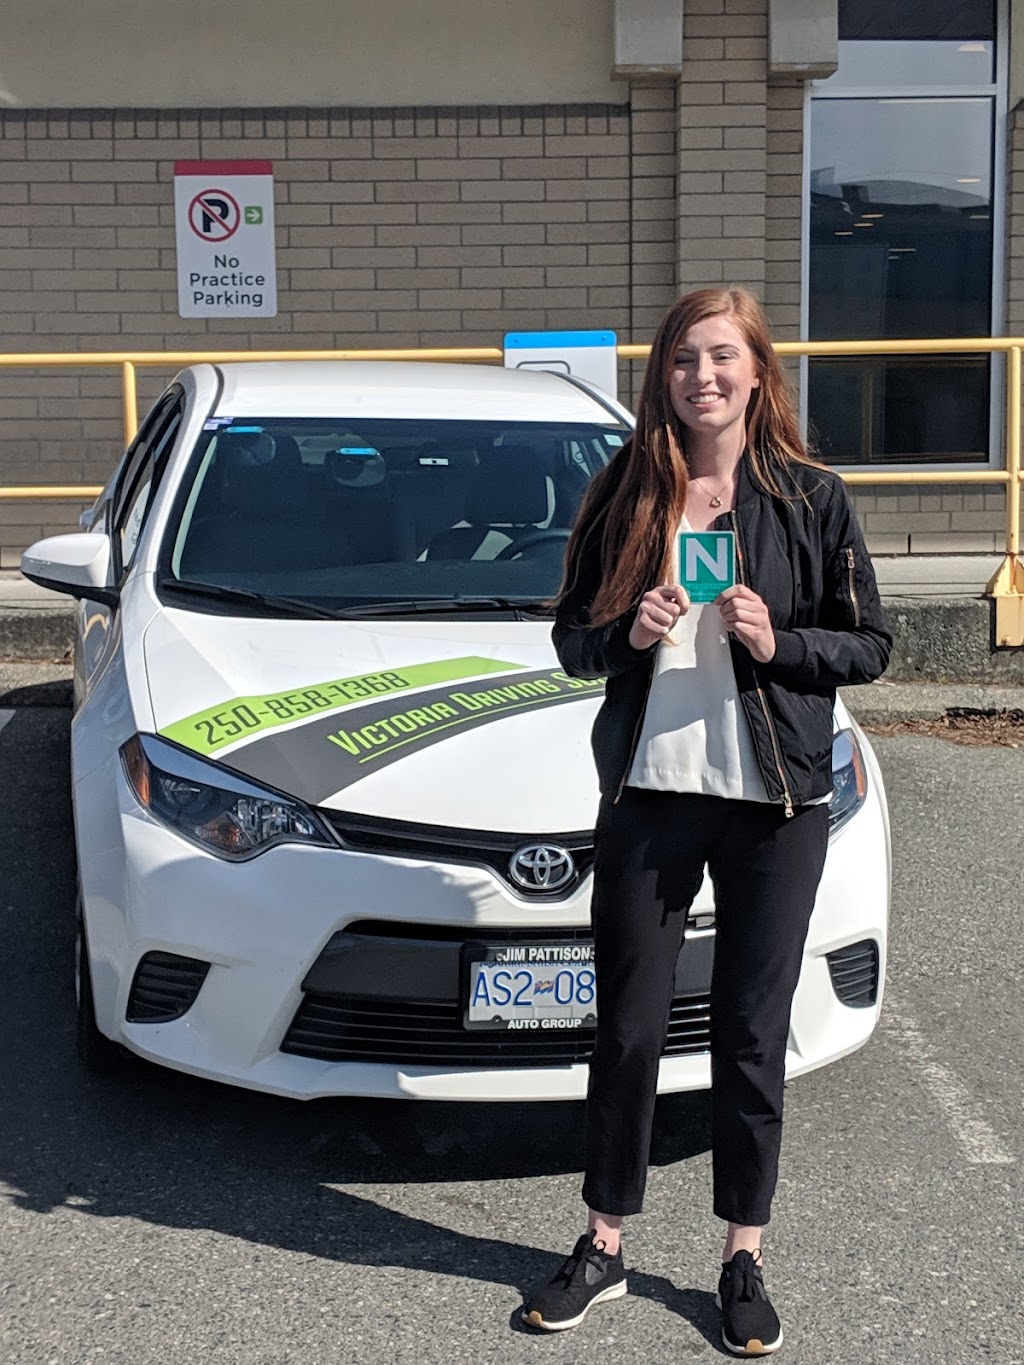 Victoria Driving School Inc | point of interest | 1251 Burnside Rd W, Victoria, BC V8Z 1N7, Canada | 2508581368 OR +1 250-858-1368